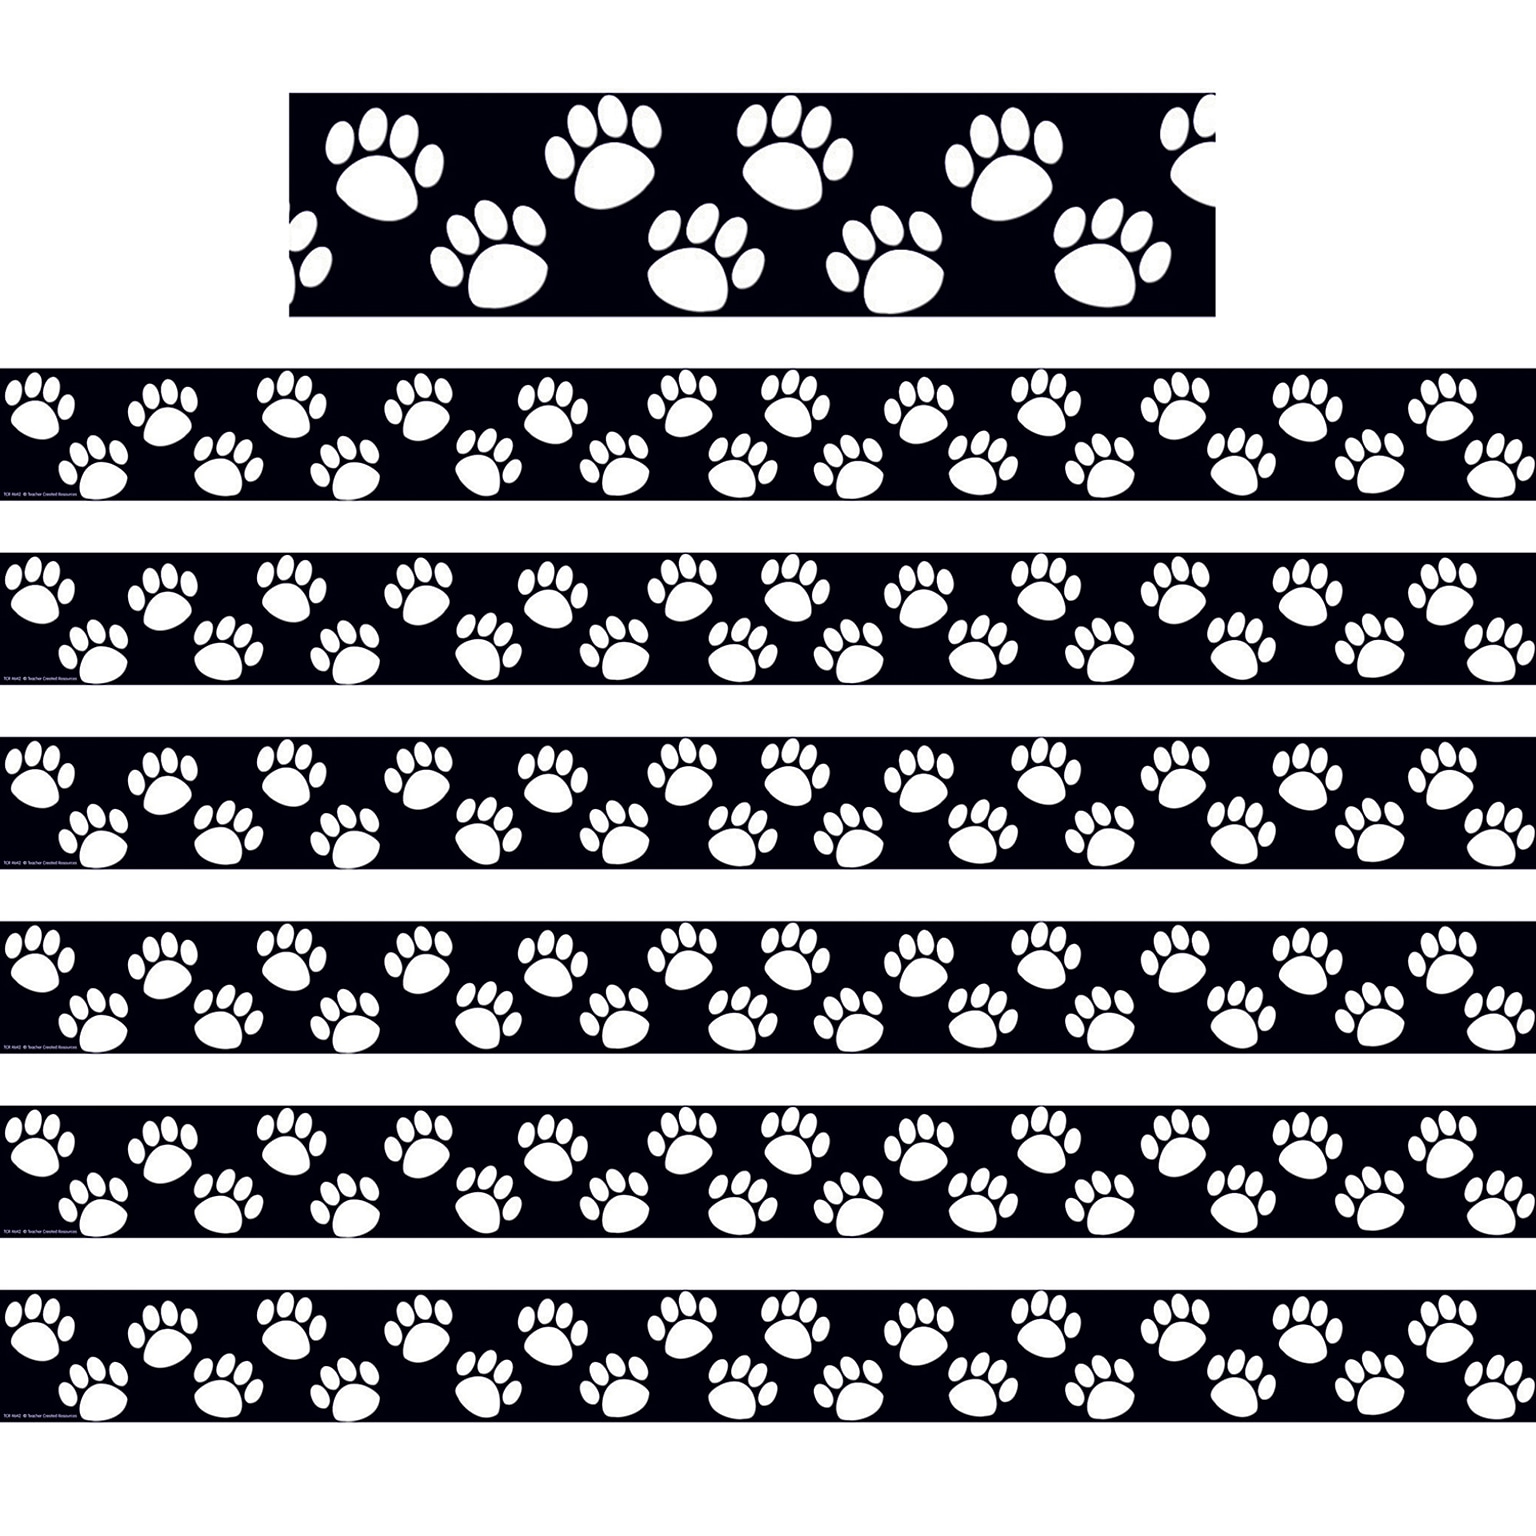 Teacher Created Resources 3 Straight Border, Black with White Paw Prints, 35 Per Pack, 6 Packs (TCR4642-6)